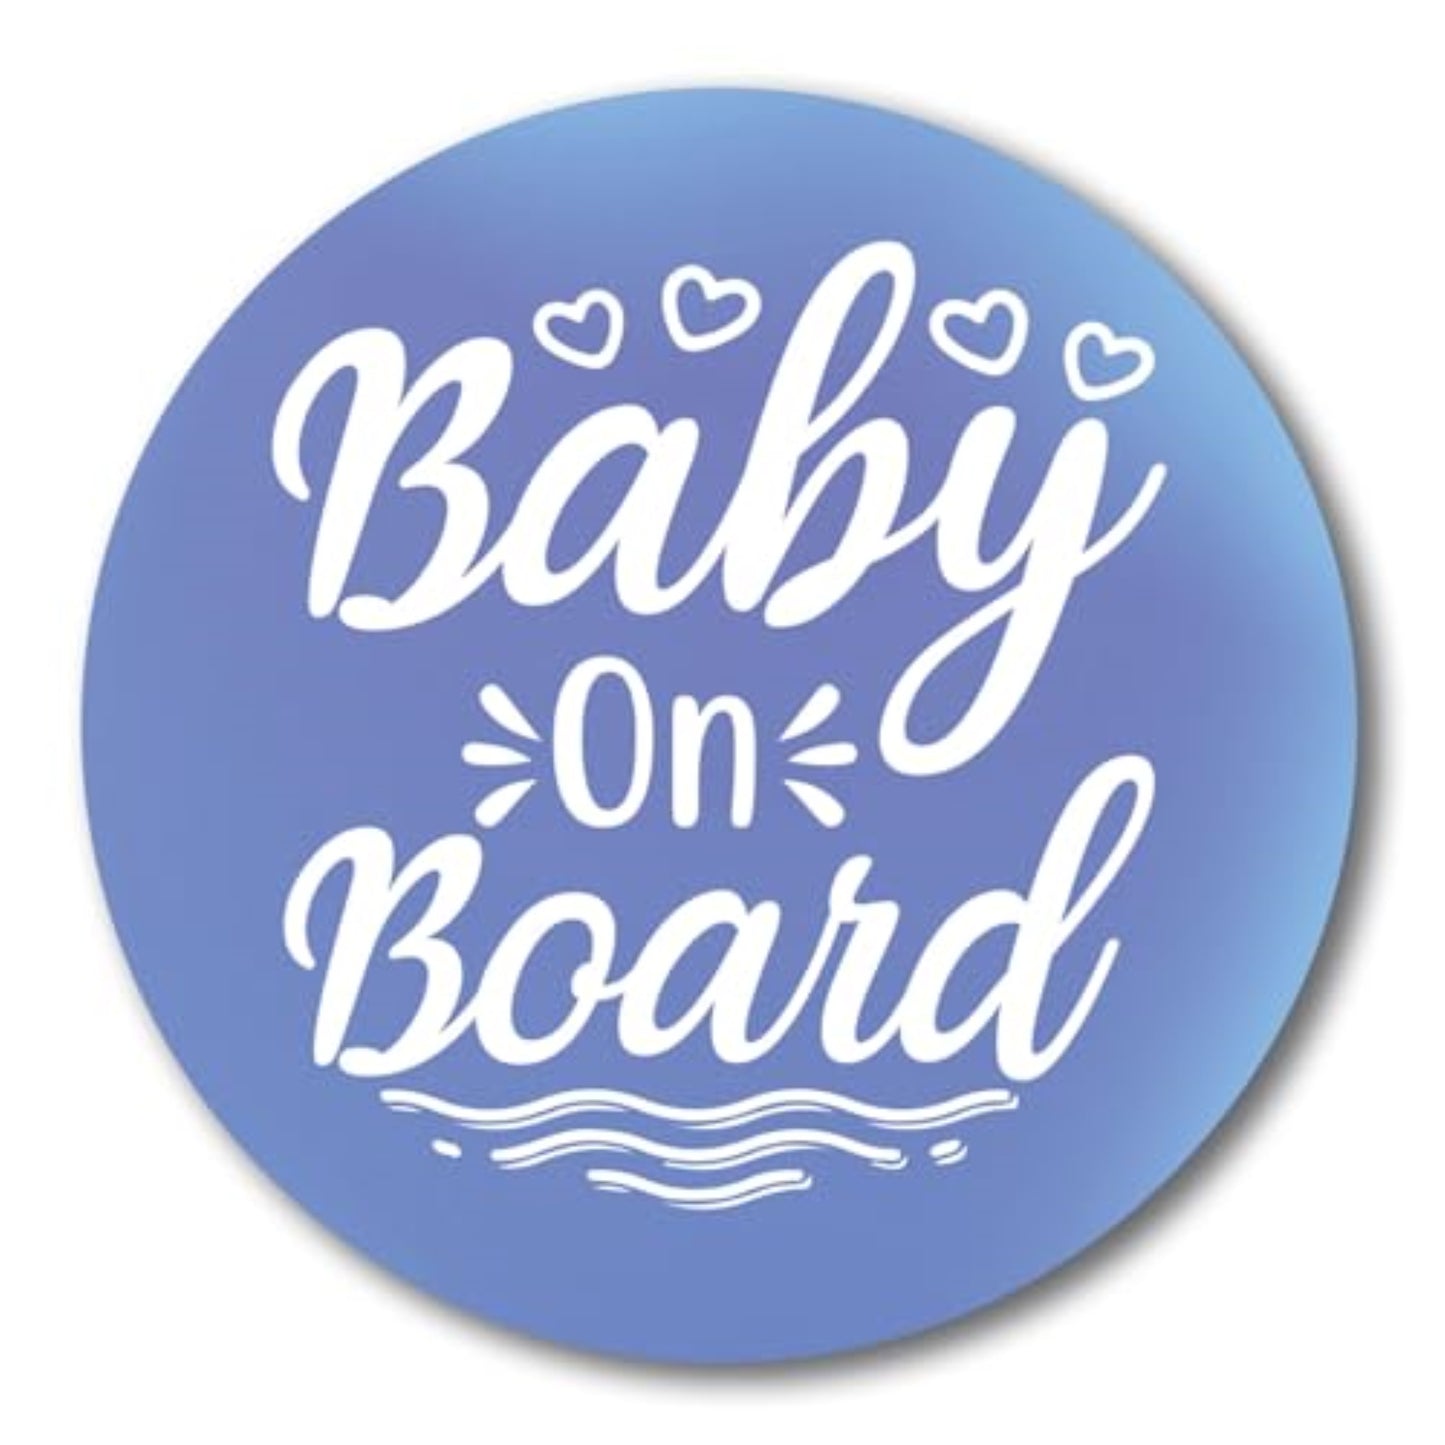 Magnet Me Up Blue and White Baby On Board Magnet Decal, 5 inch Round, Heavy Duty for Car, Truck, SUV, Protect Precious Cargo, Safety Sign for Your Vehicle, Keep Kids Safe, Crafted in The USA